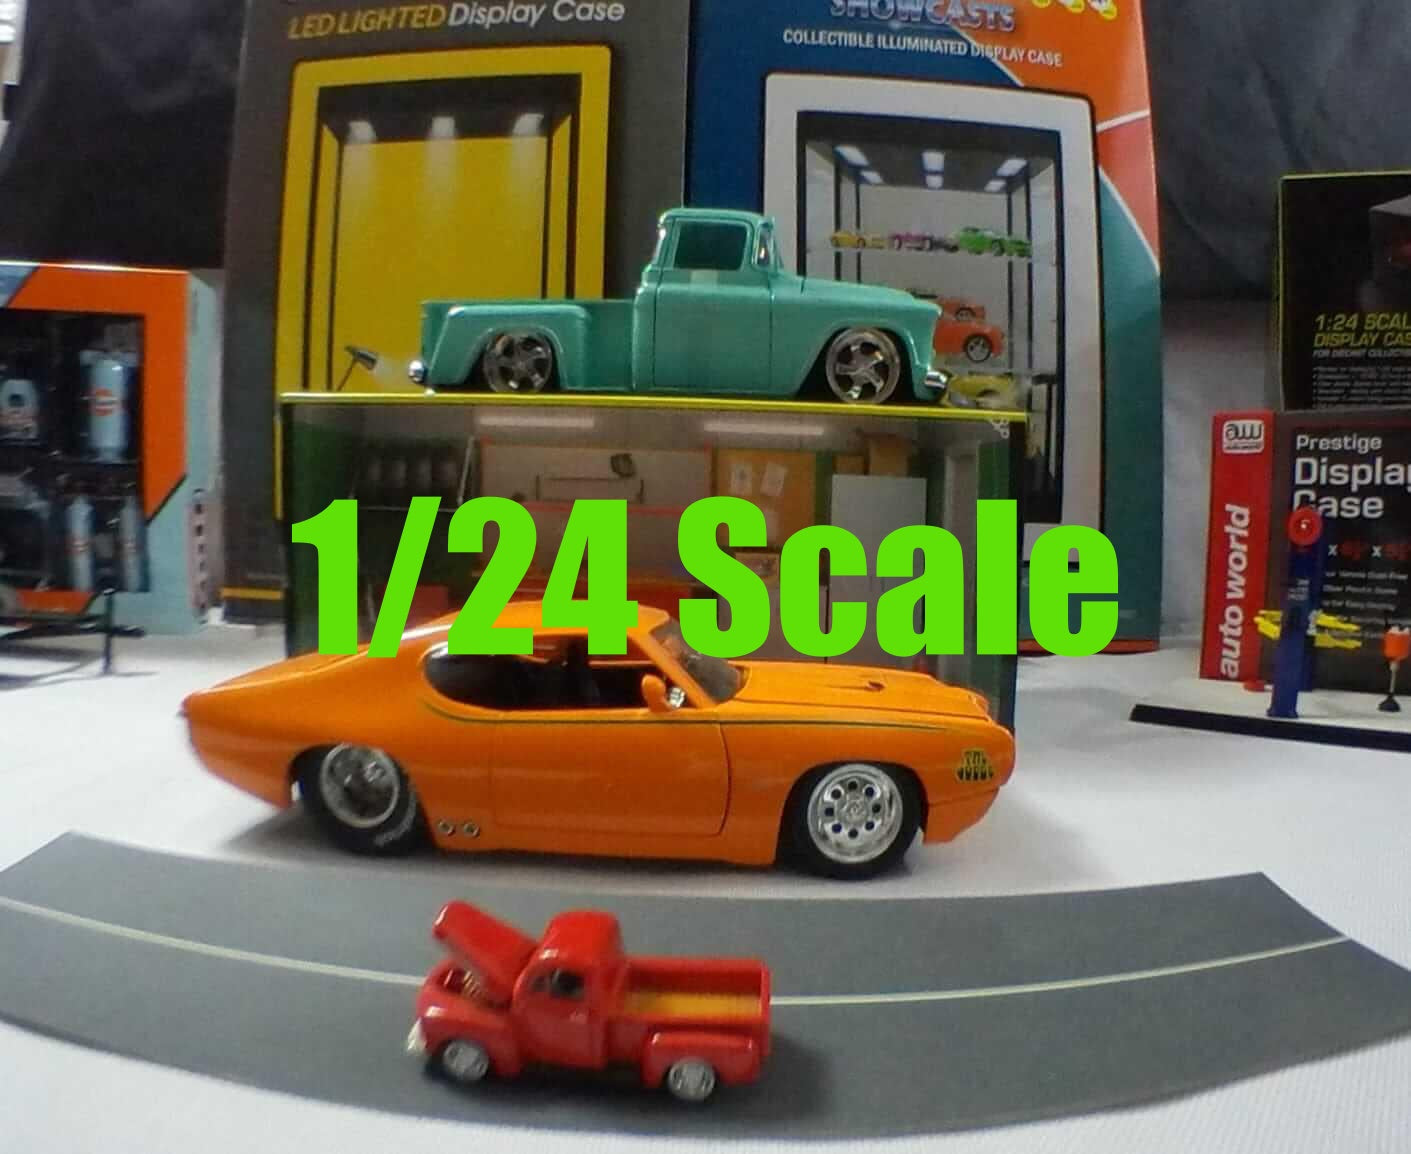 1:24 Scale models